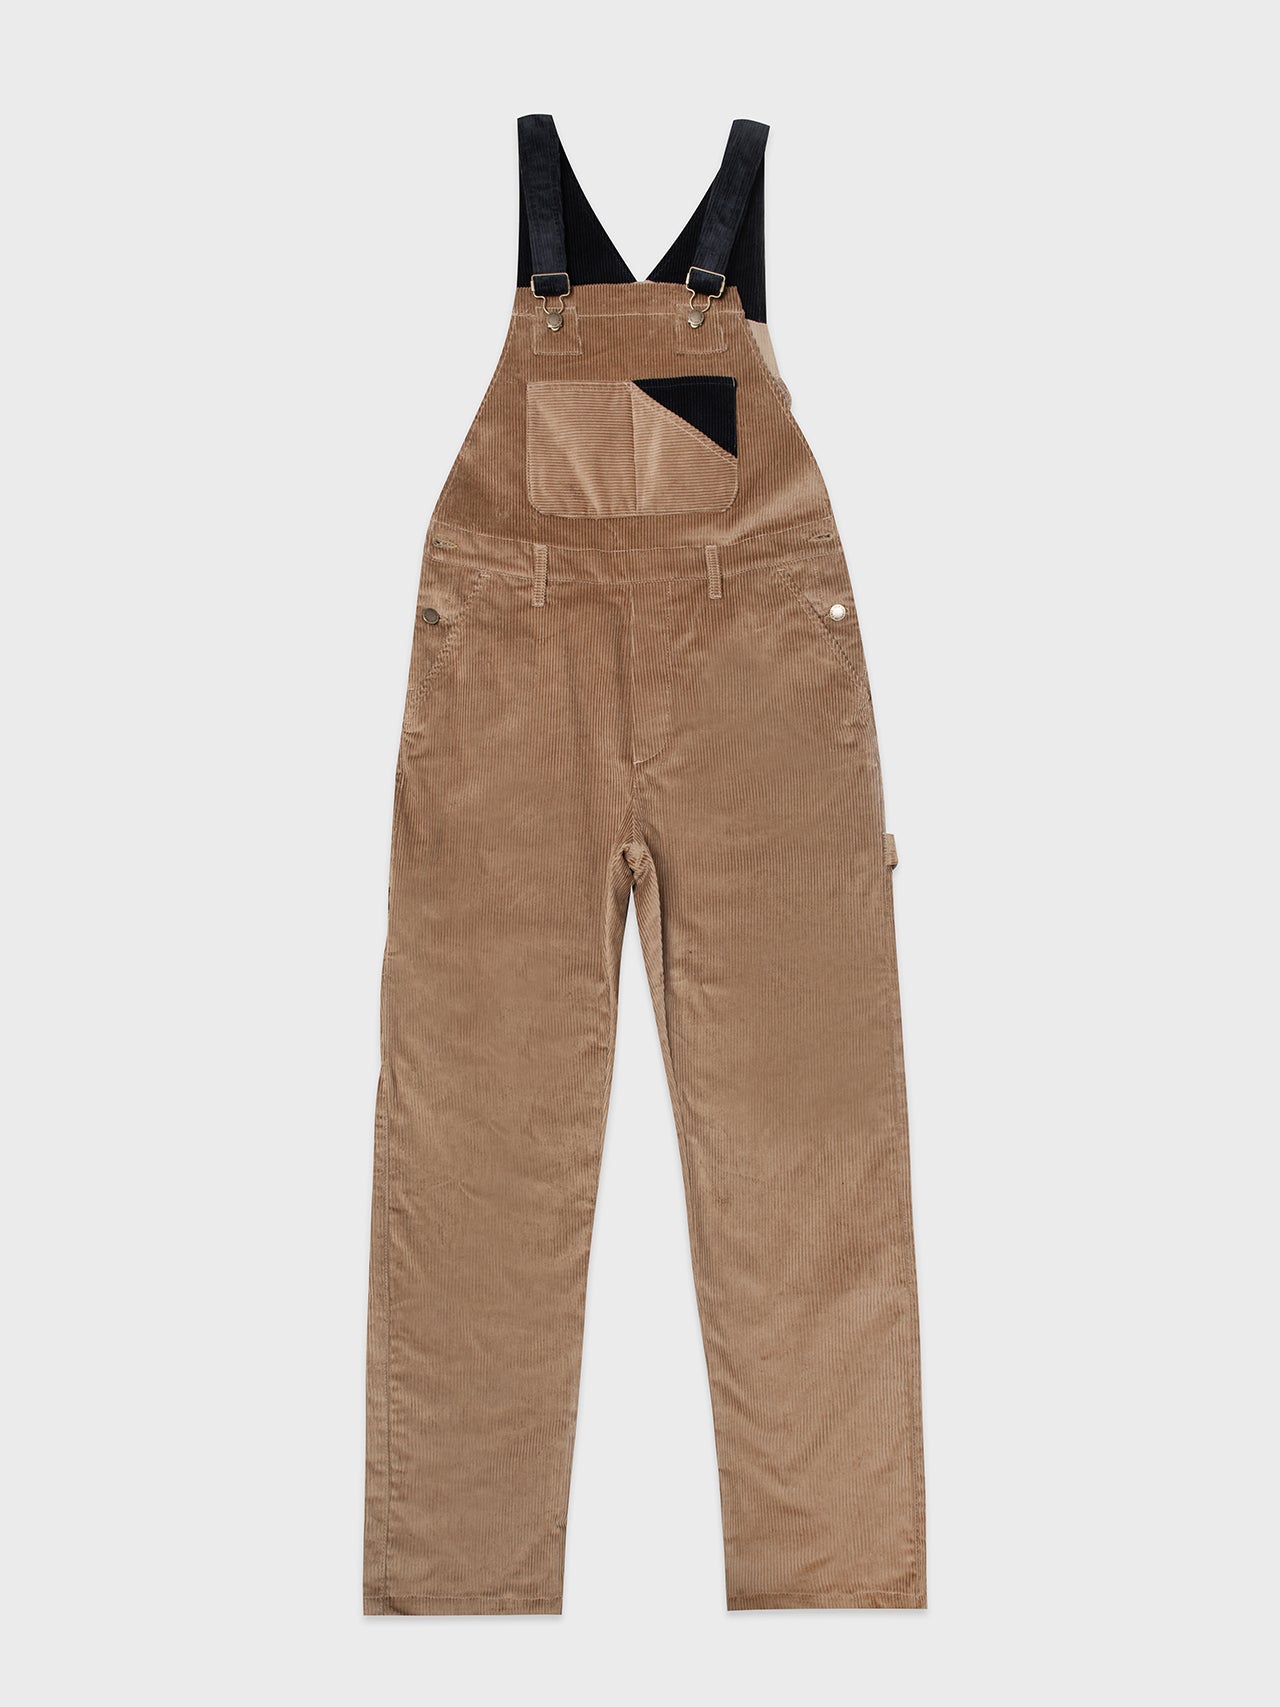 CAT WWR CORDUROY OVERALL